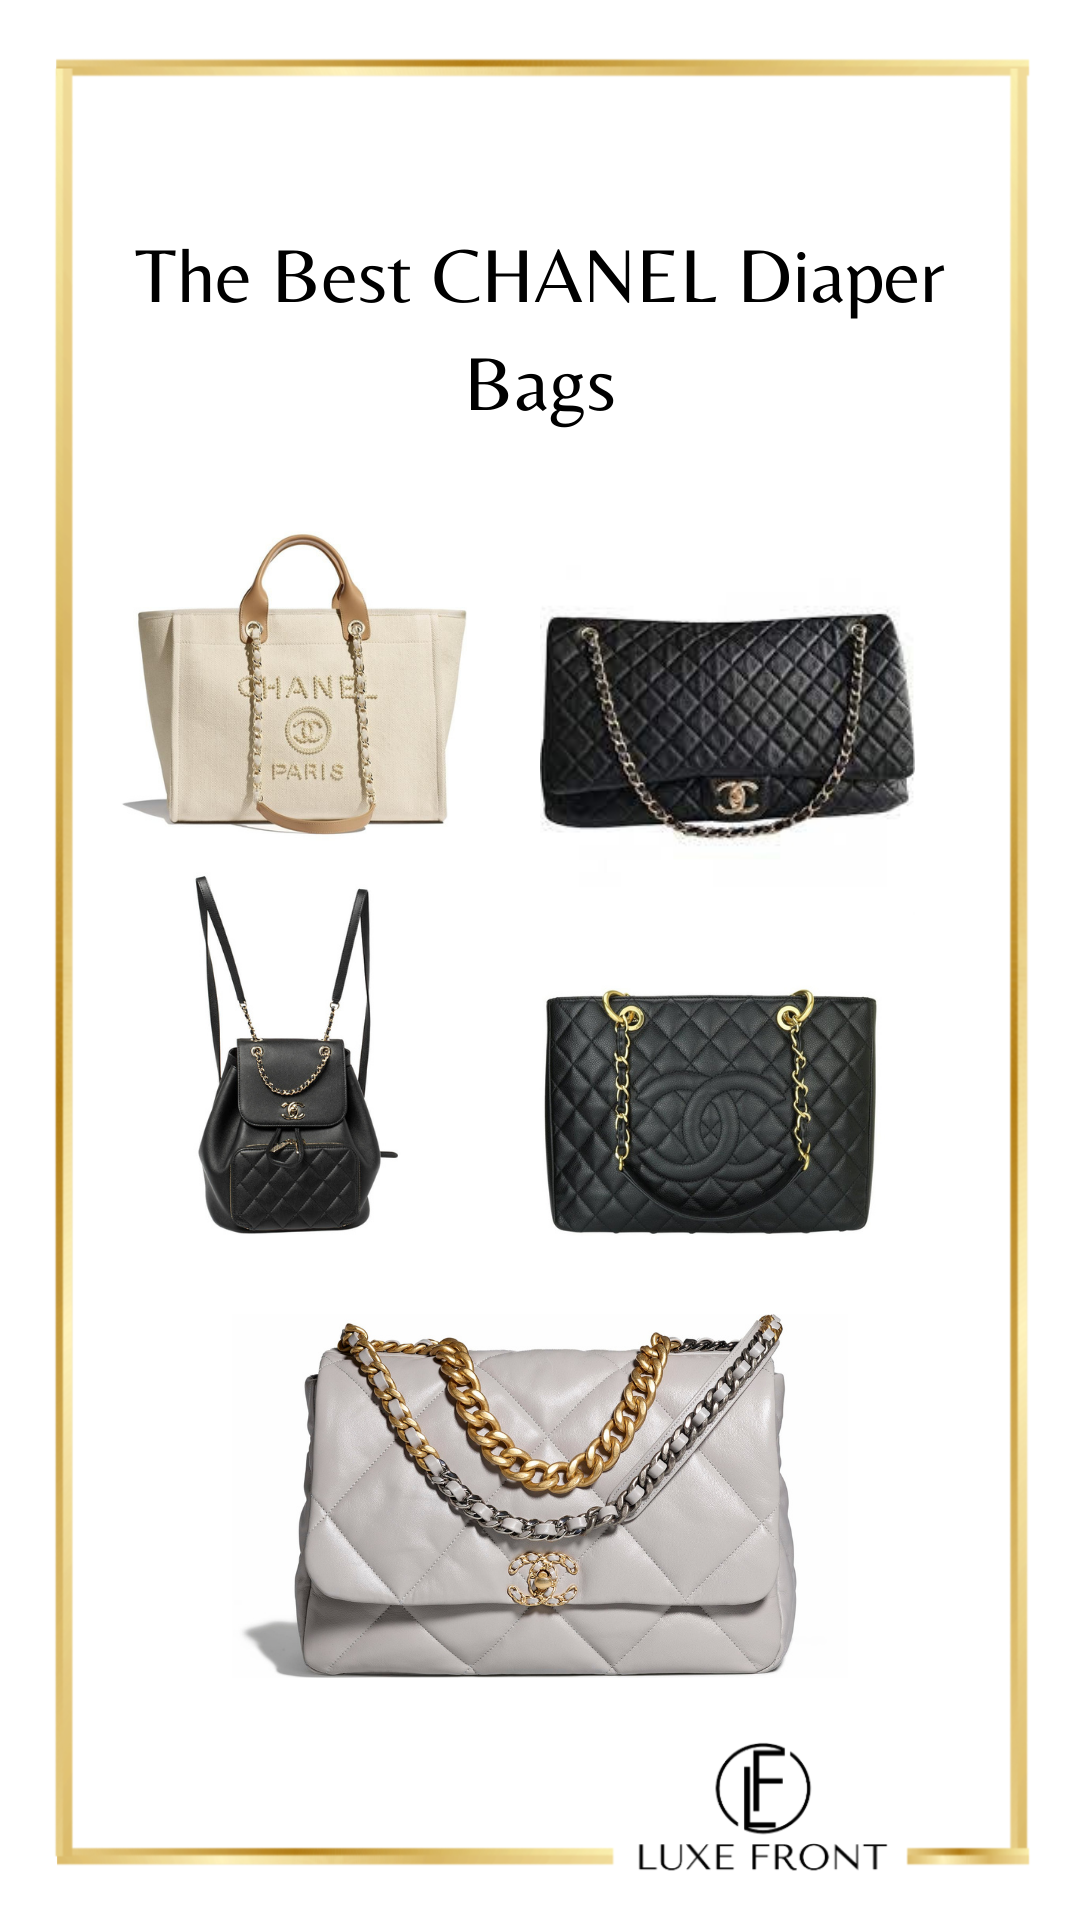 The Best Chanel Diaper Bags